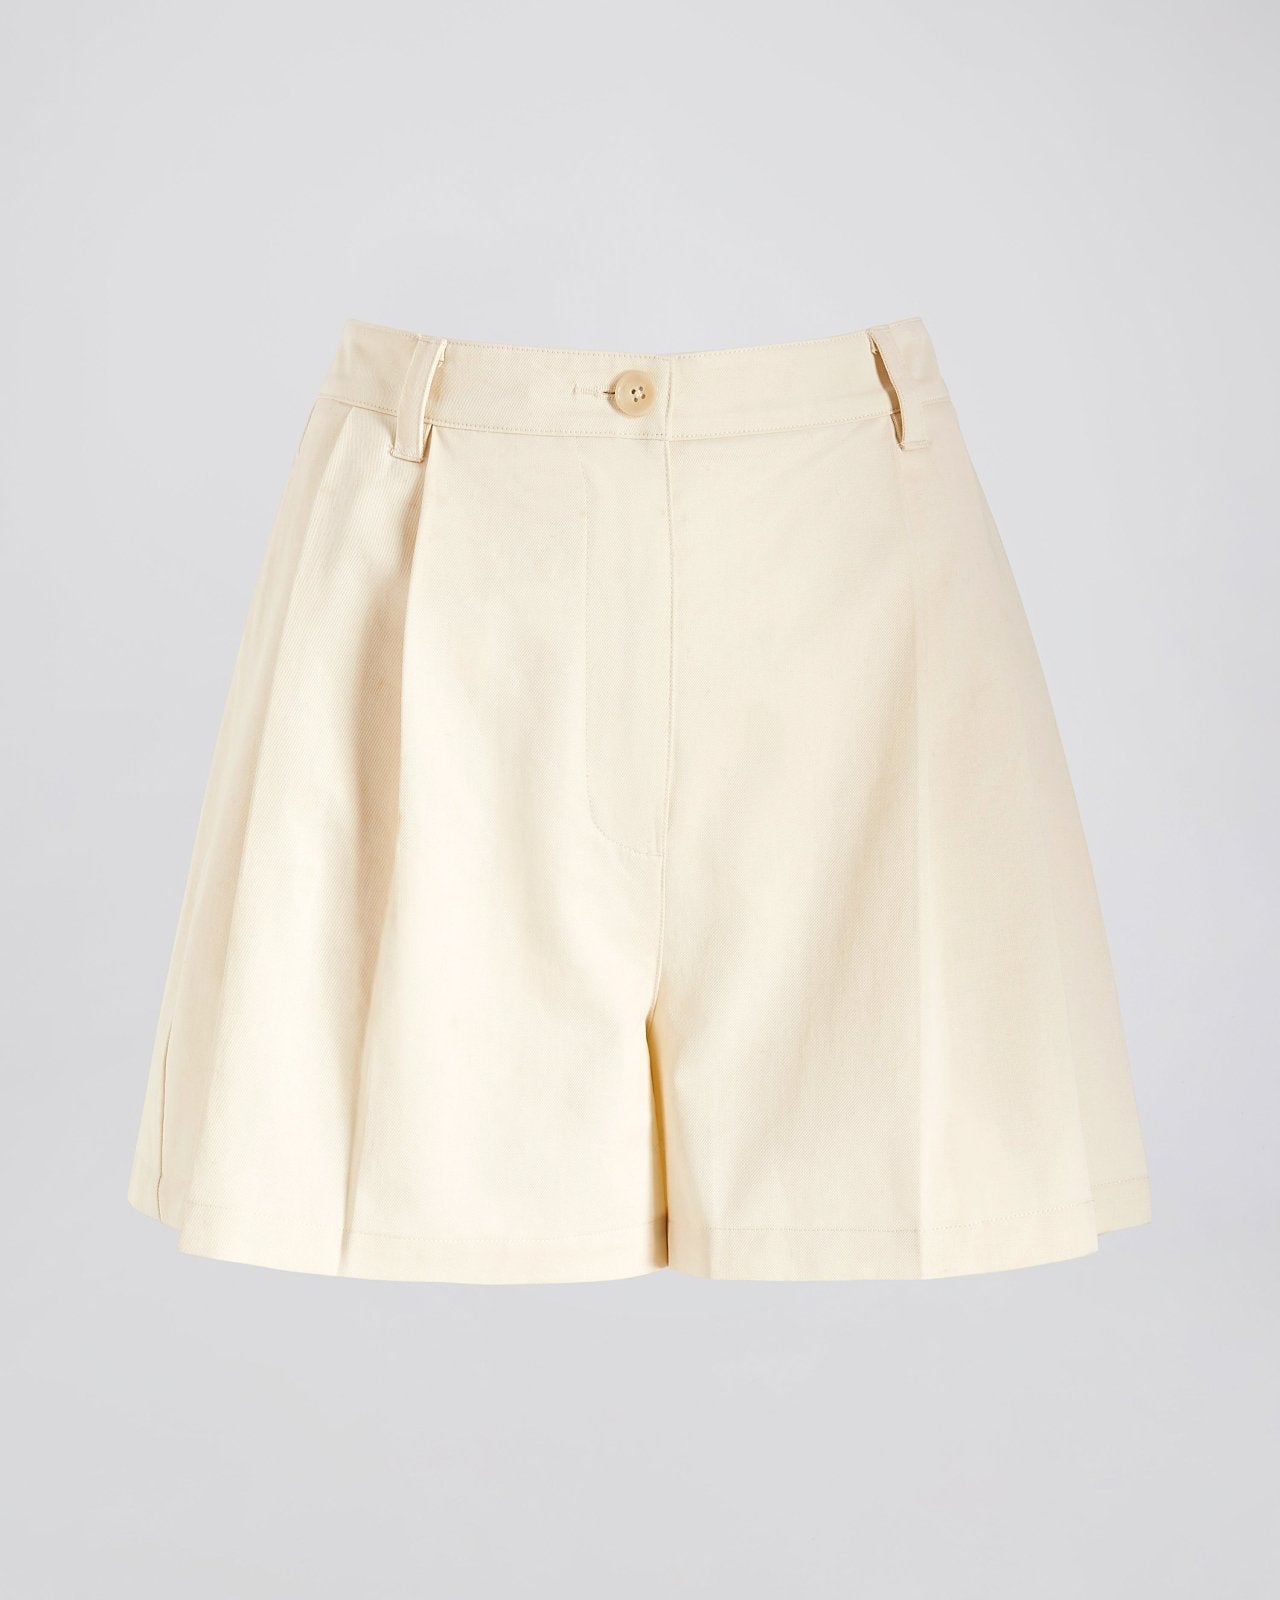 The Oceane Short - Solid & Striped